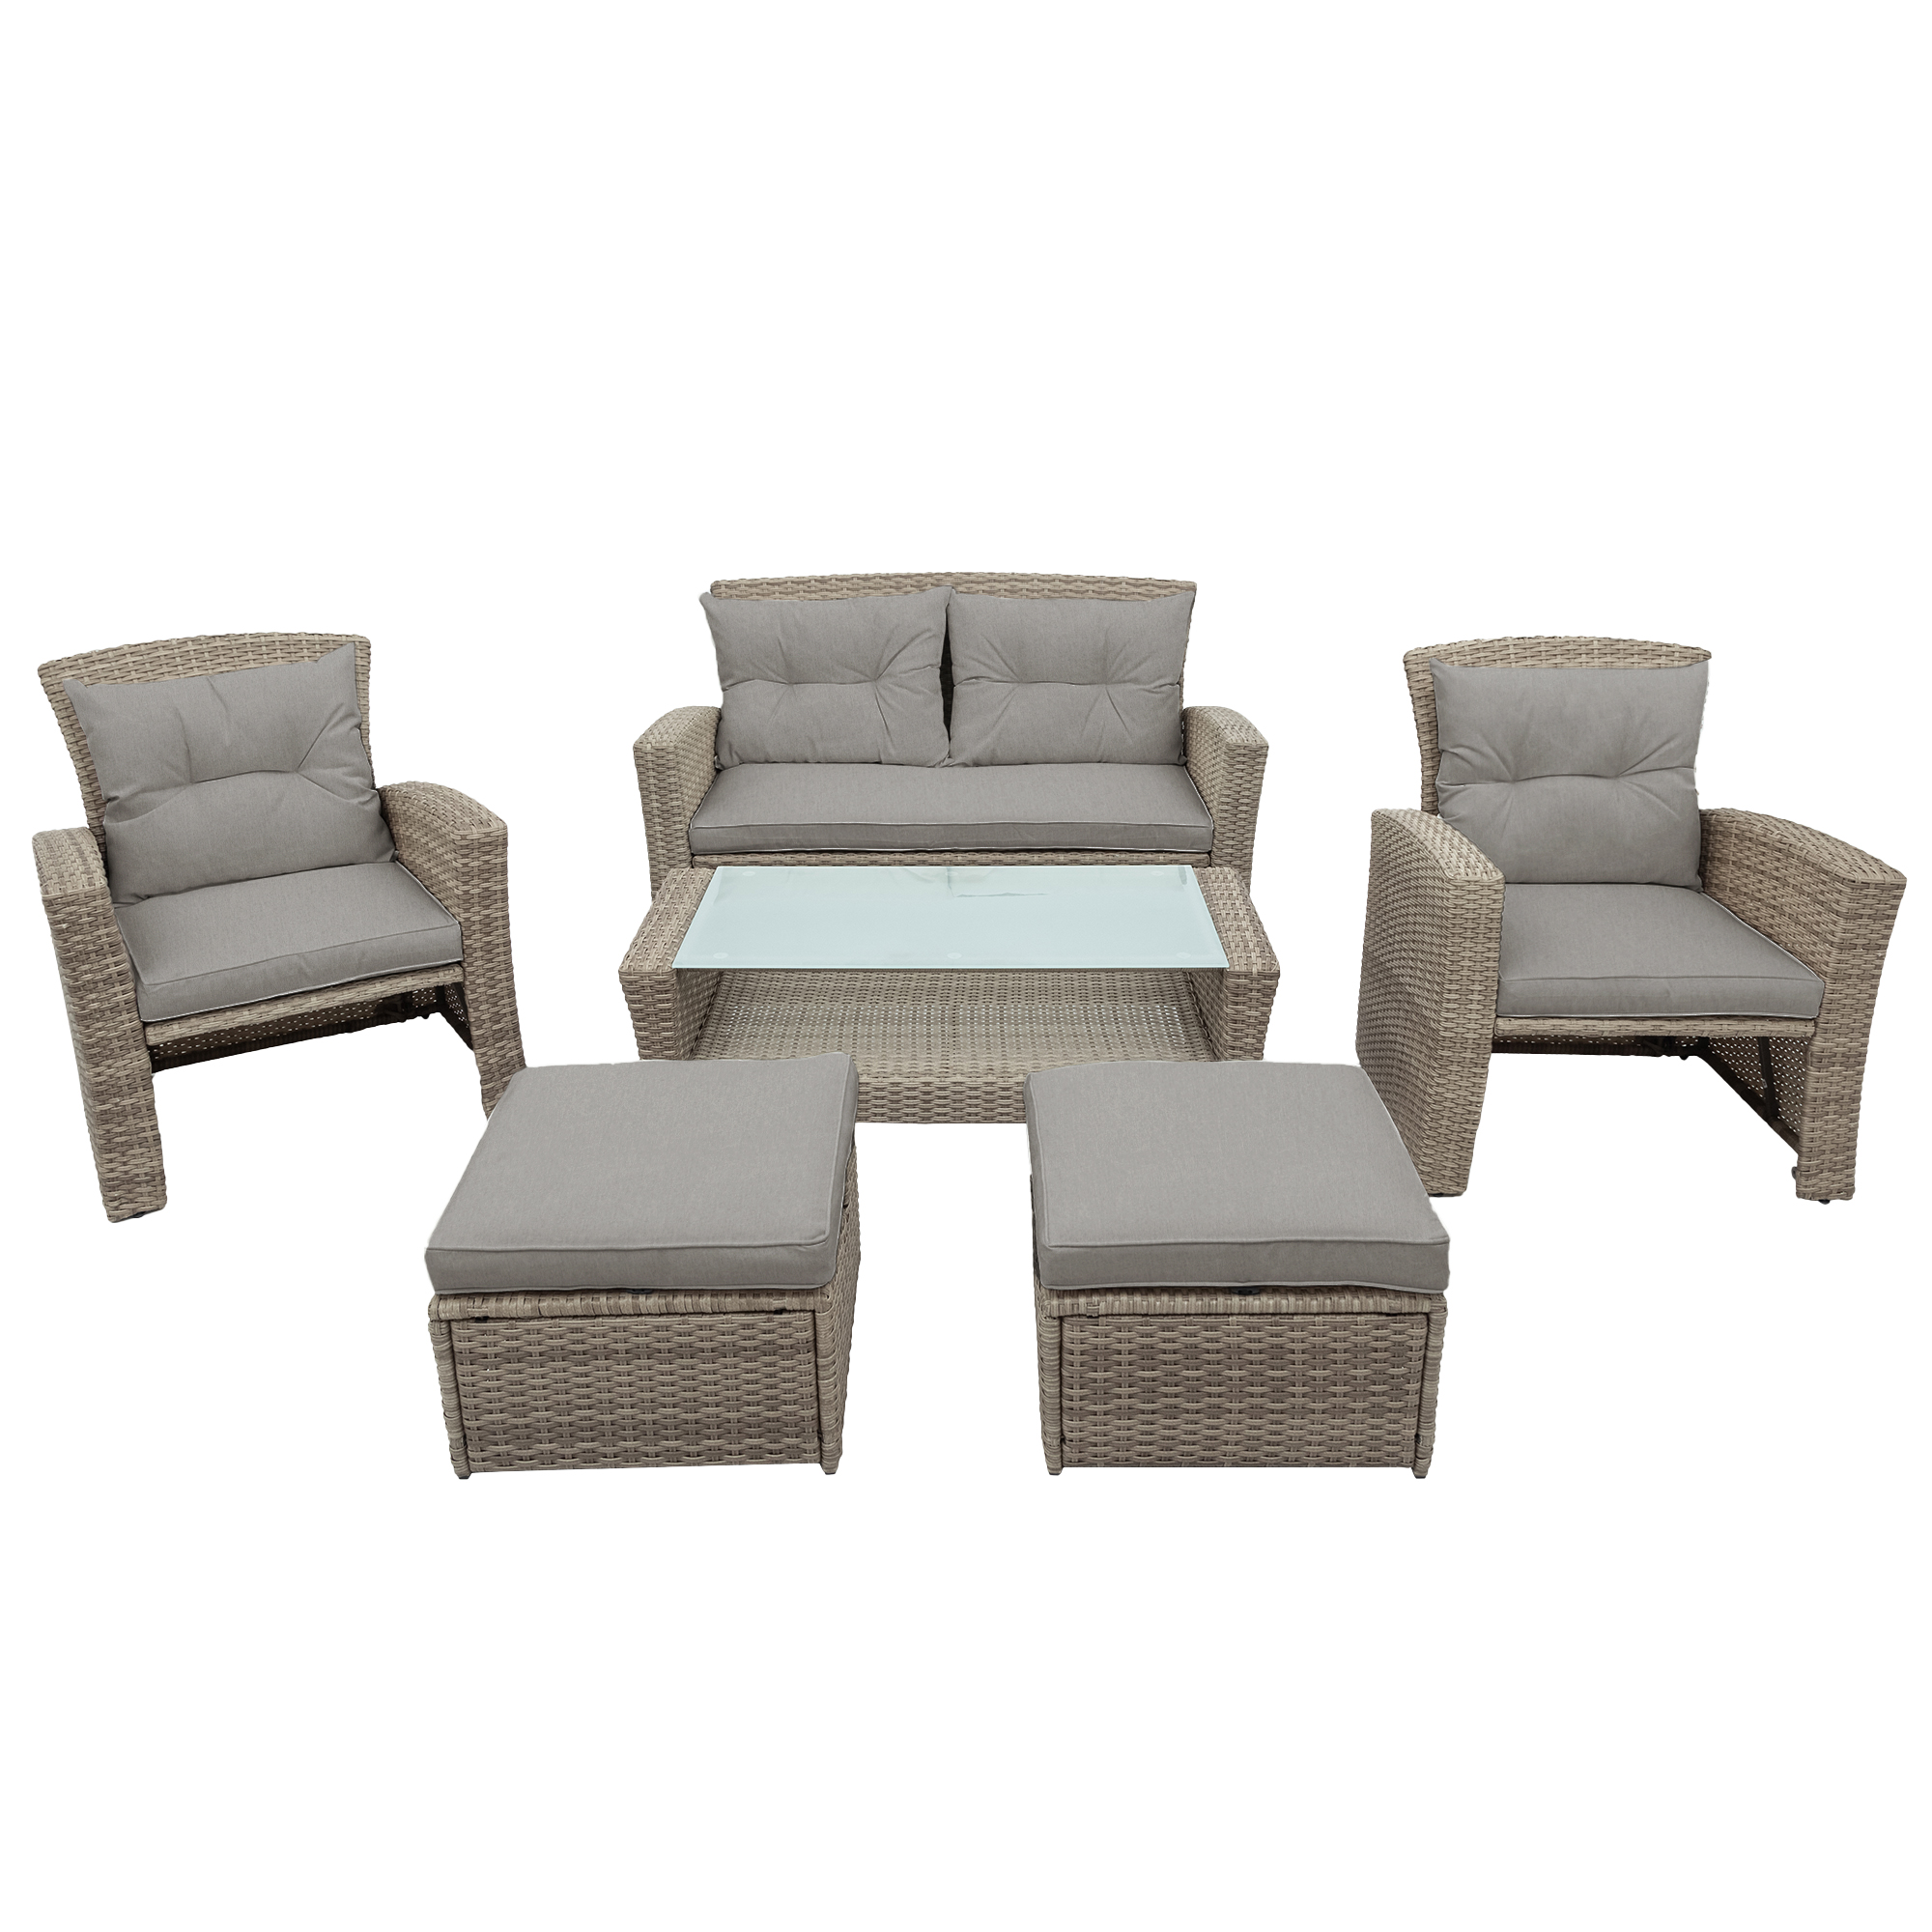 Gray Rattan Patio Sectional Set, SESSLIFE 6-Piece Outdoor Conversation Set with 1 Loveseat, 2 Chairs, 2 Ottomans, 1 Coffee Table, Patio Couches Sets for Porch Garden Balcony - image 4 of 9